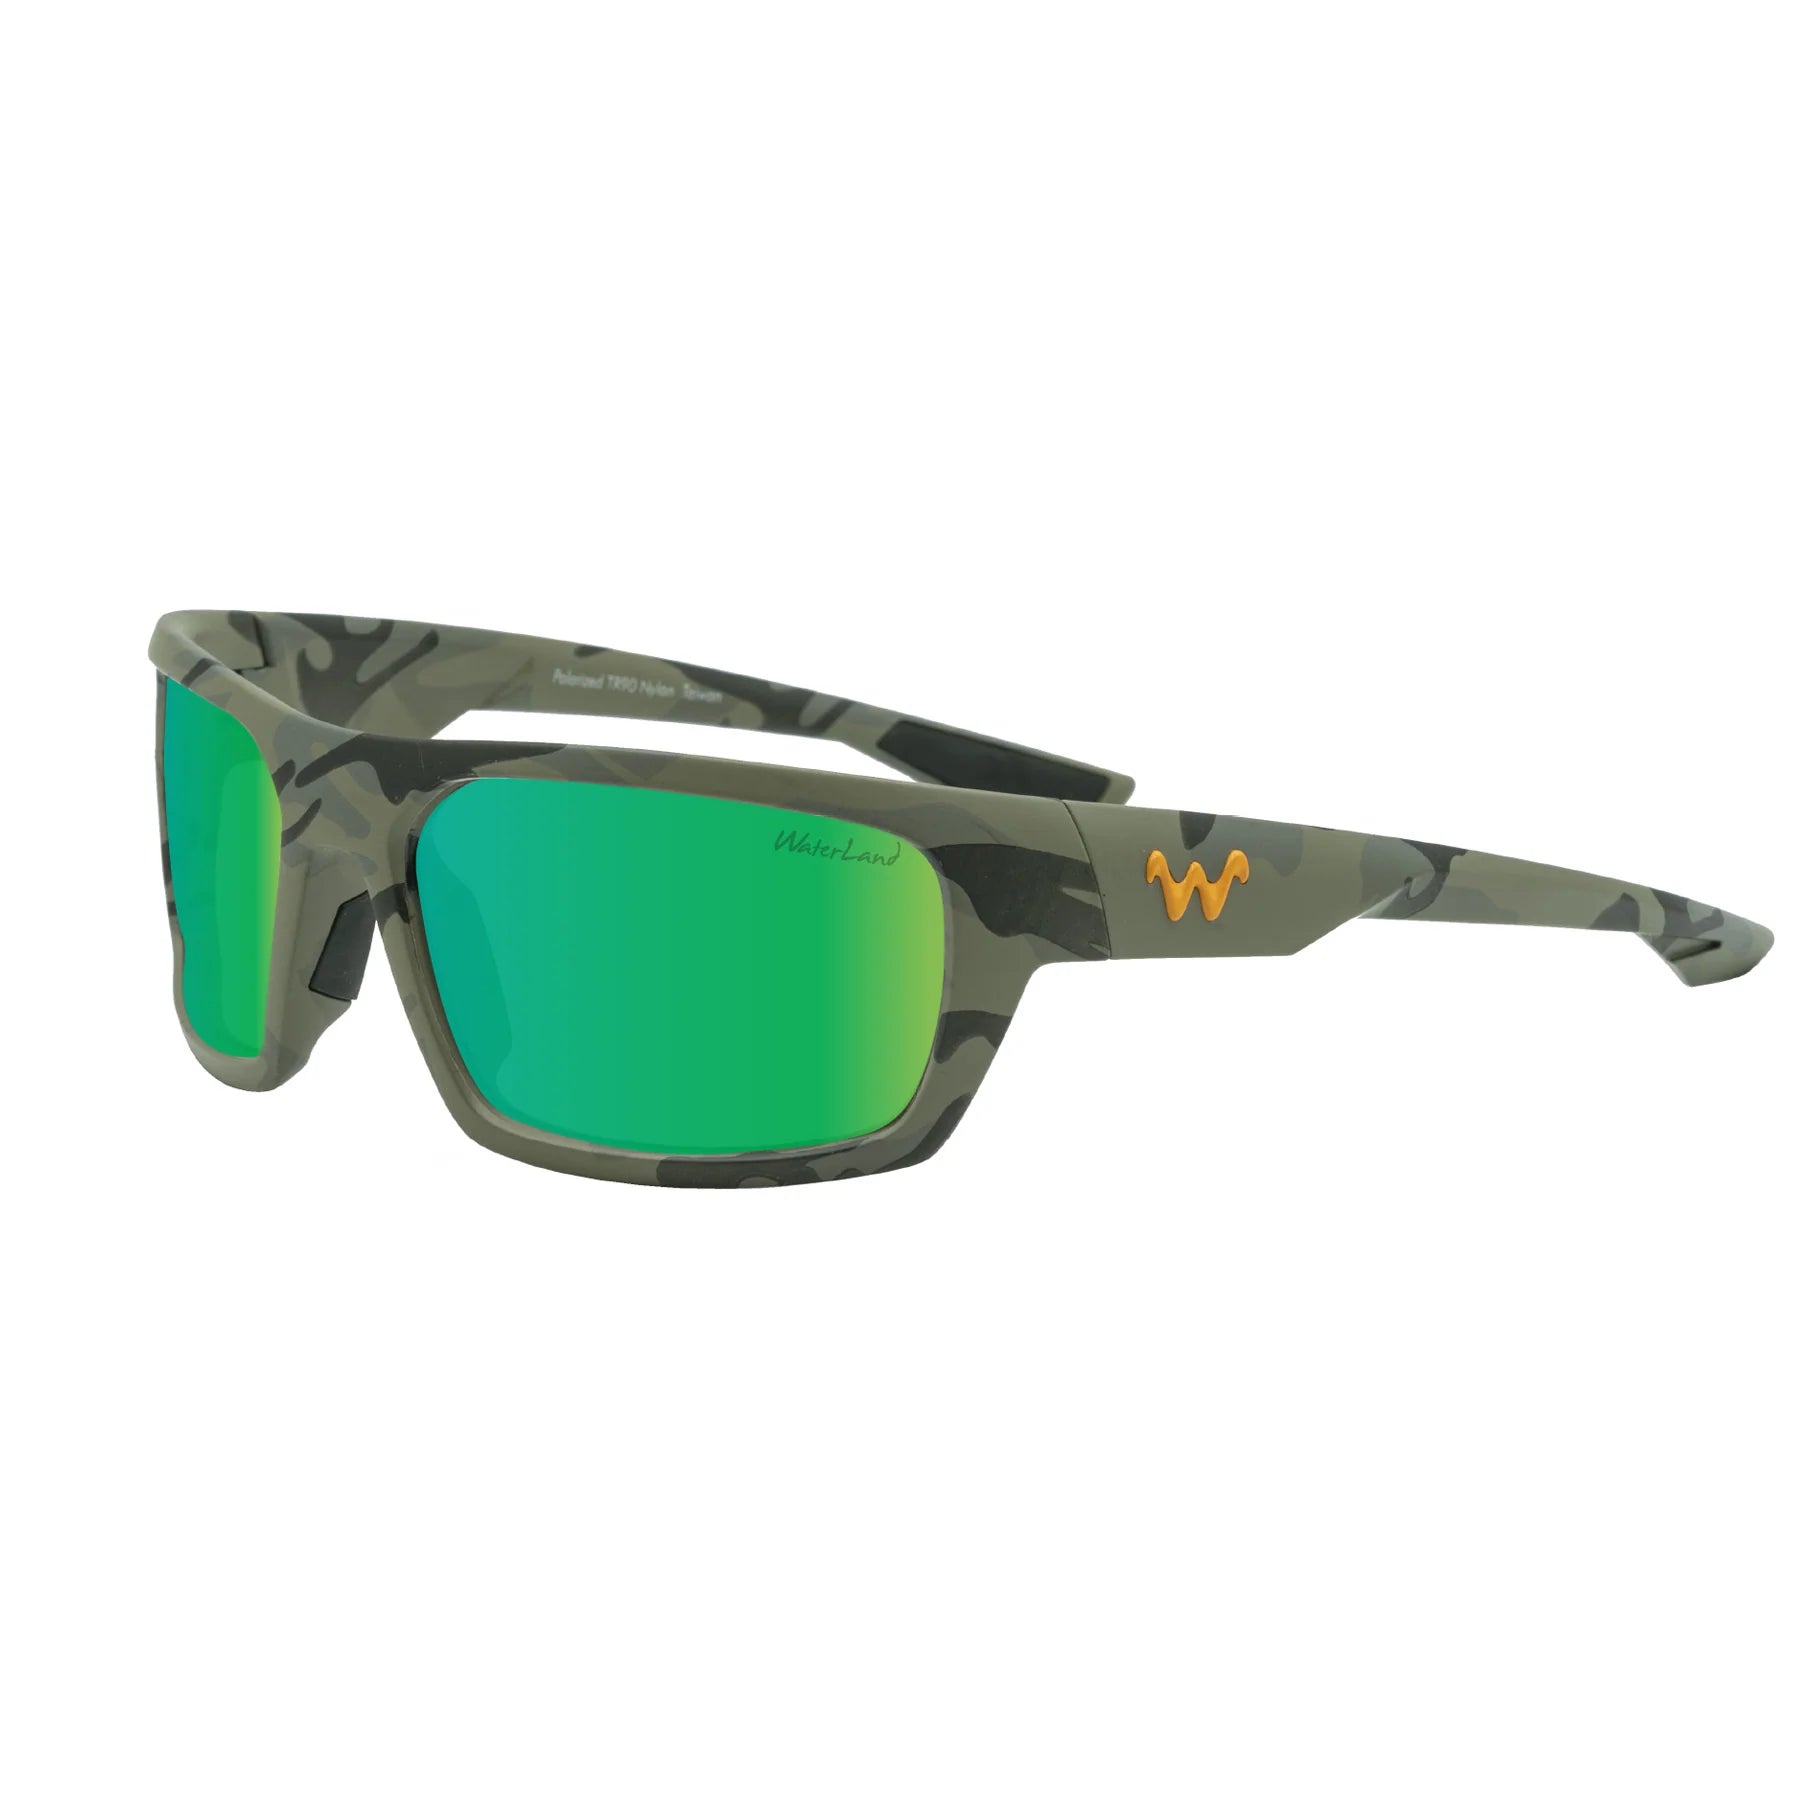 Ops Camo Frame with Green Mirror